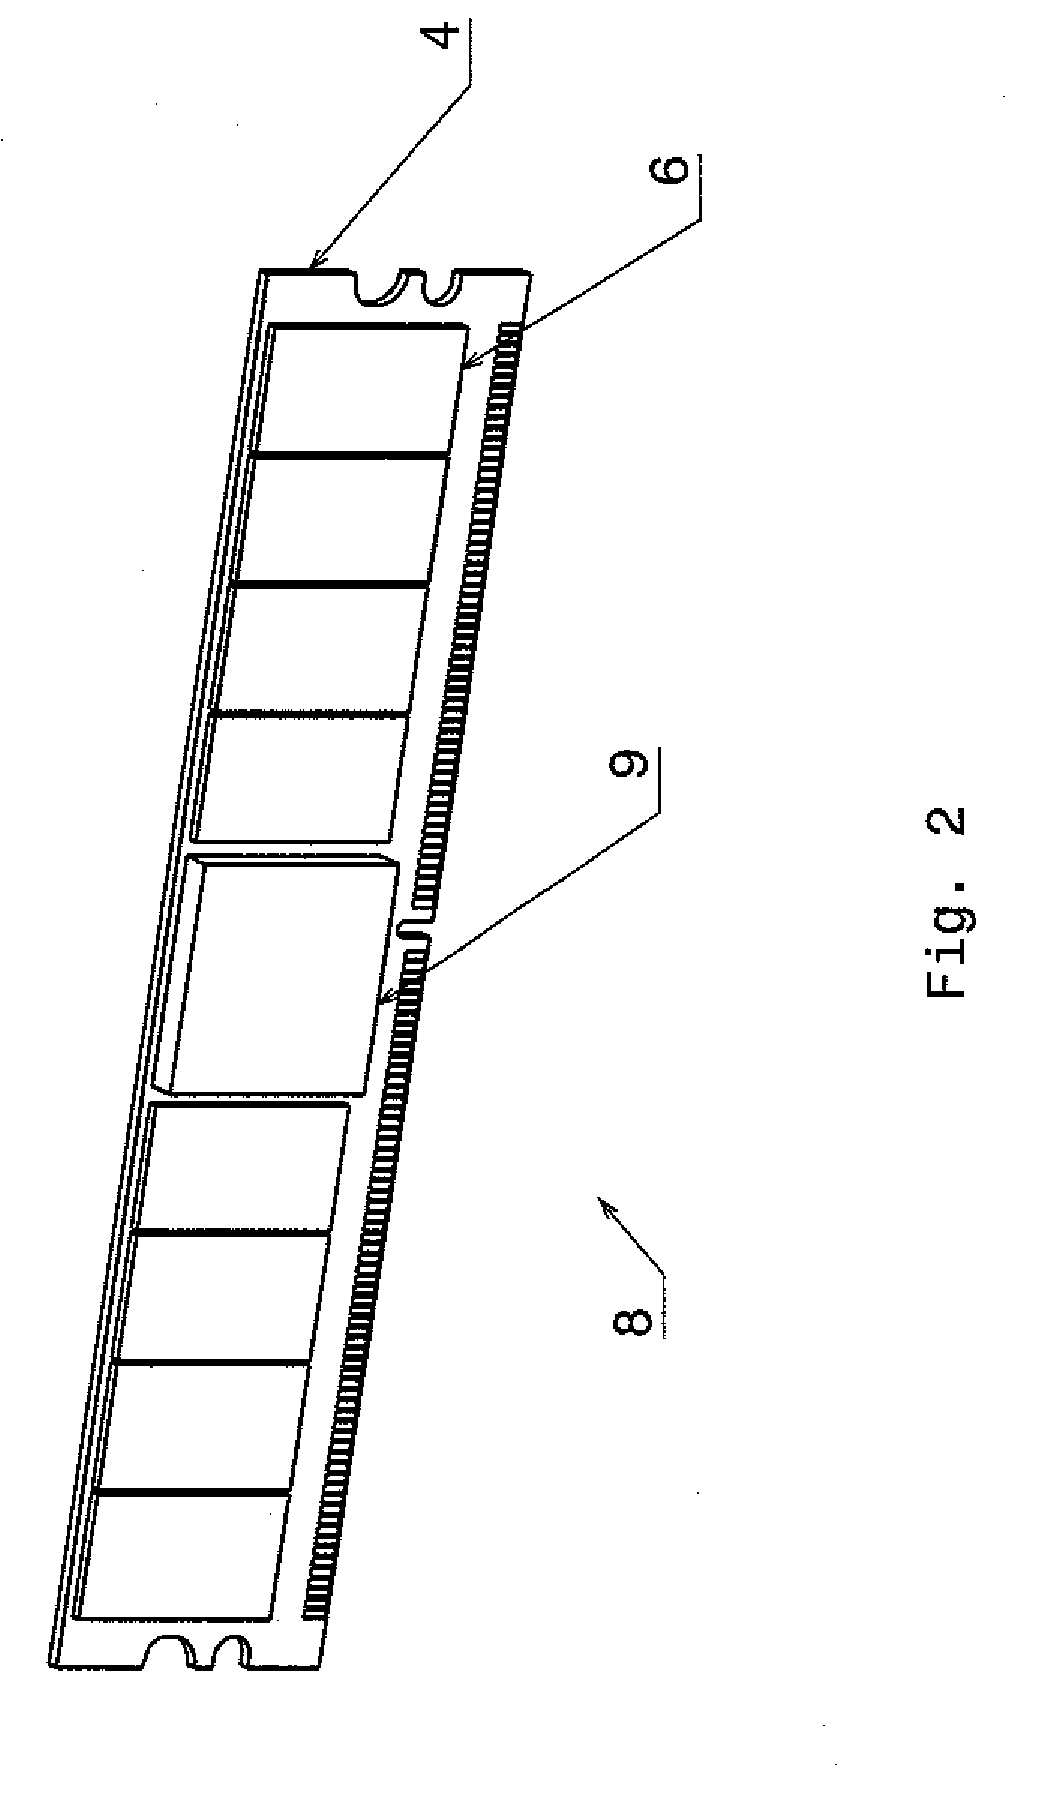 Method and apparatus of water cooling several parallel circuit cards each containing several chip packages